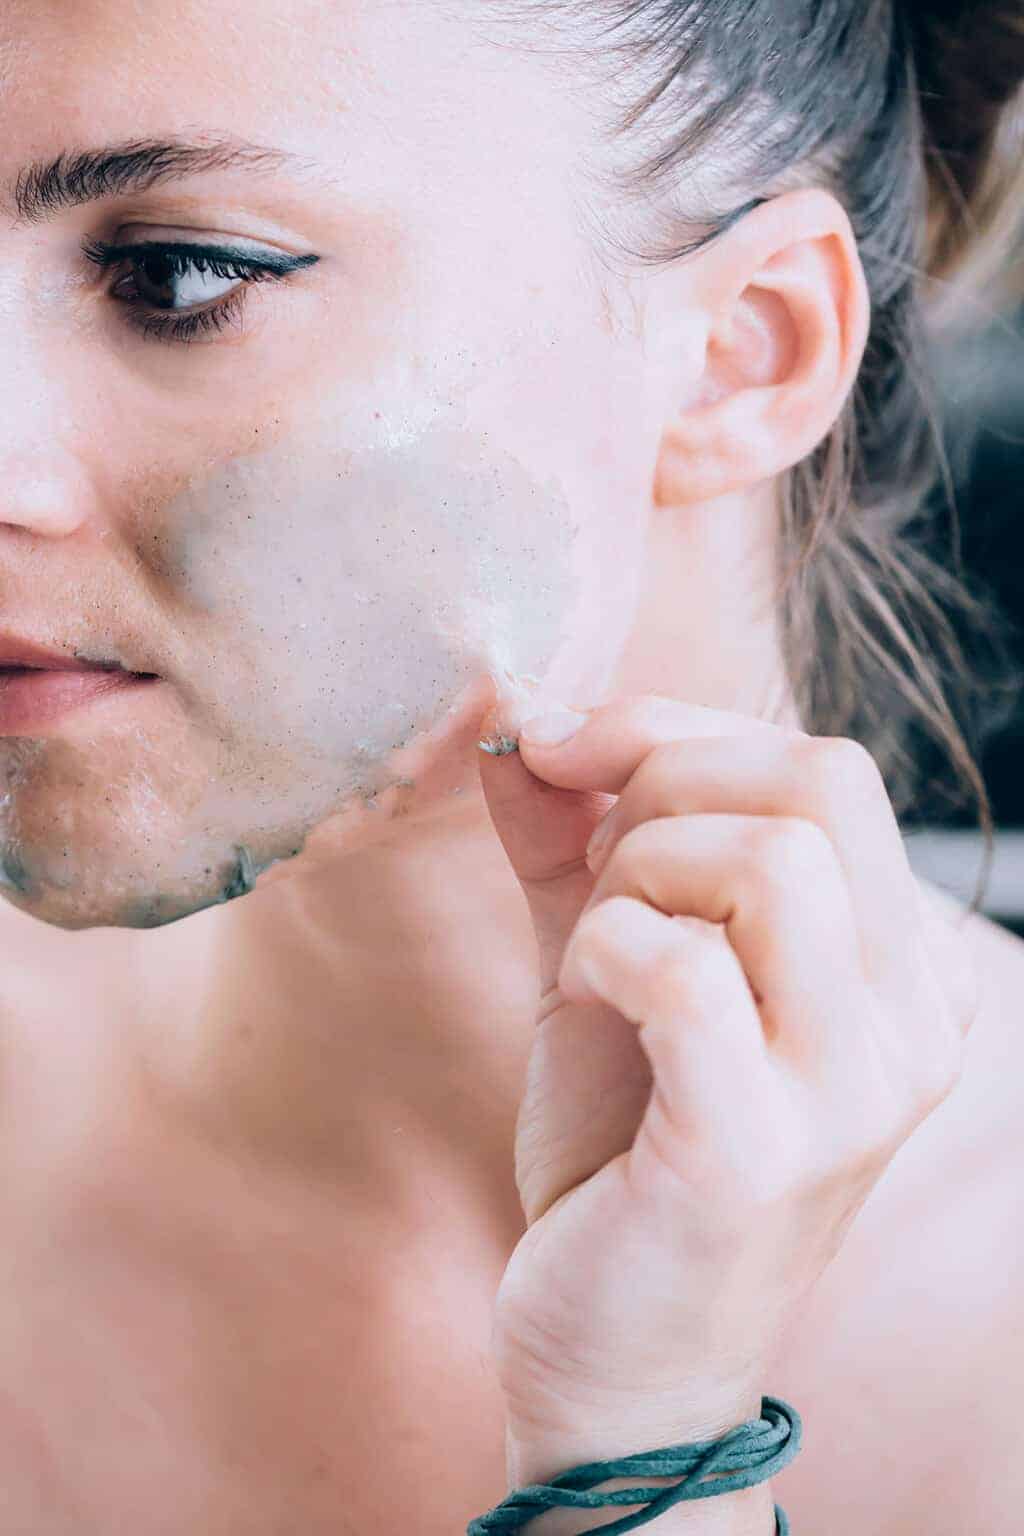 Rubber peel off mask